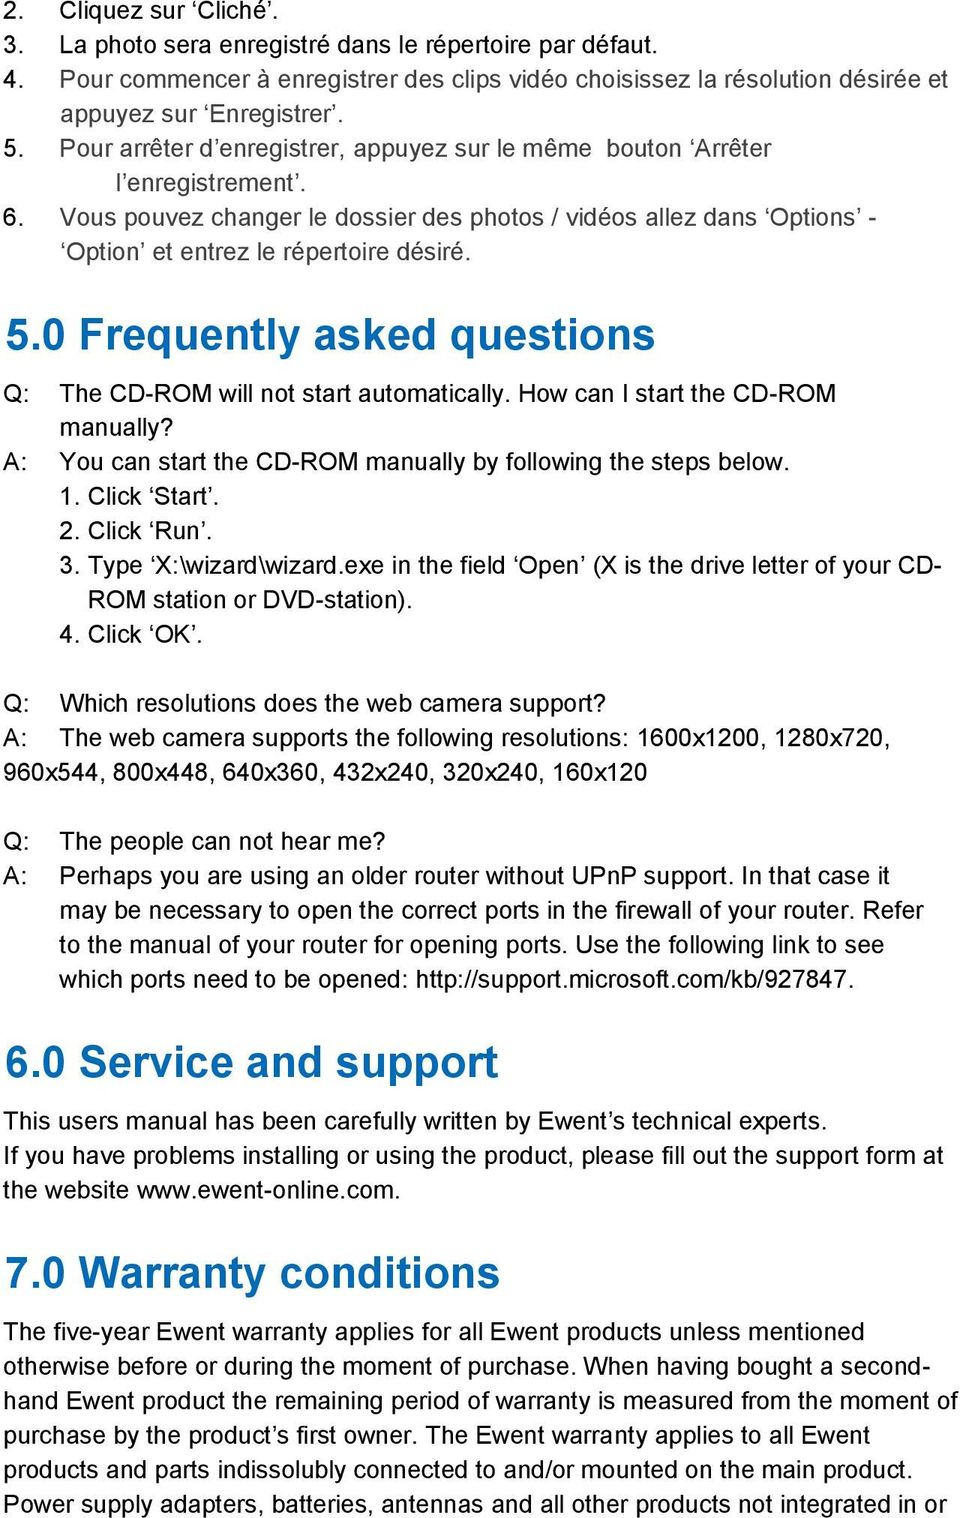 0 Frequently asked questions Q: The CD-ROM will not start automatically. How can I start the CD-ROM manually? A: You can start the CD-ROM manually by following the steps below. 1. Click Start. 2.